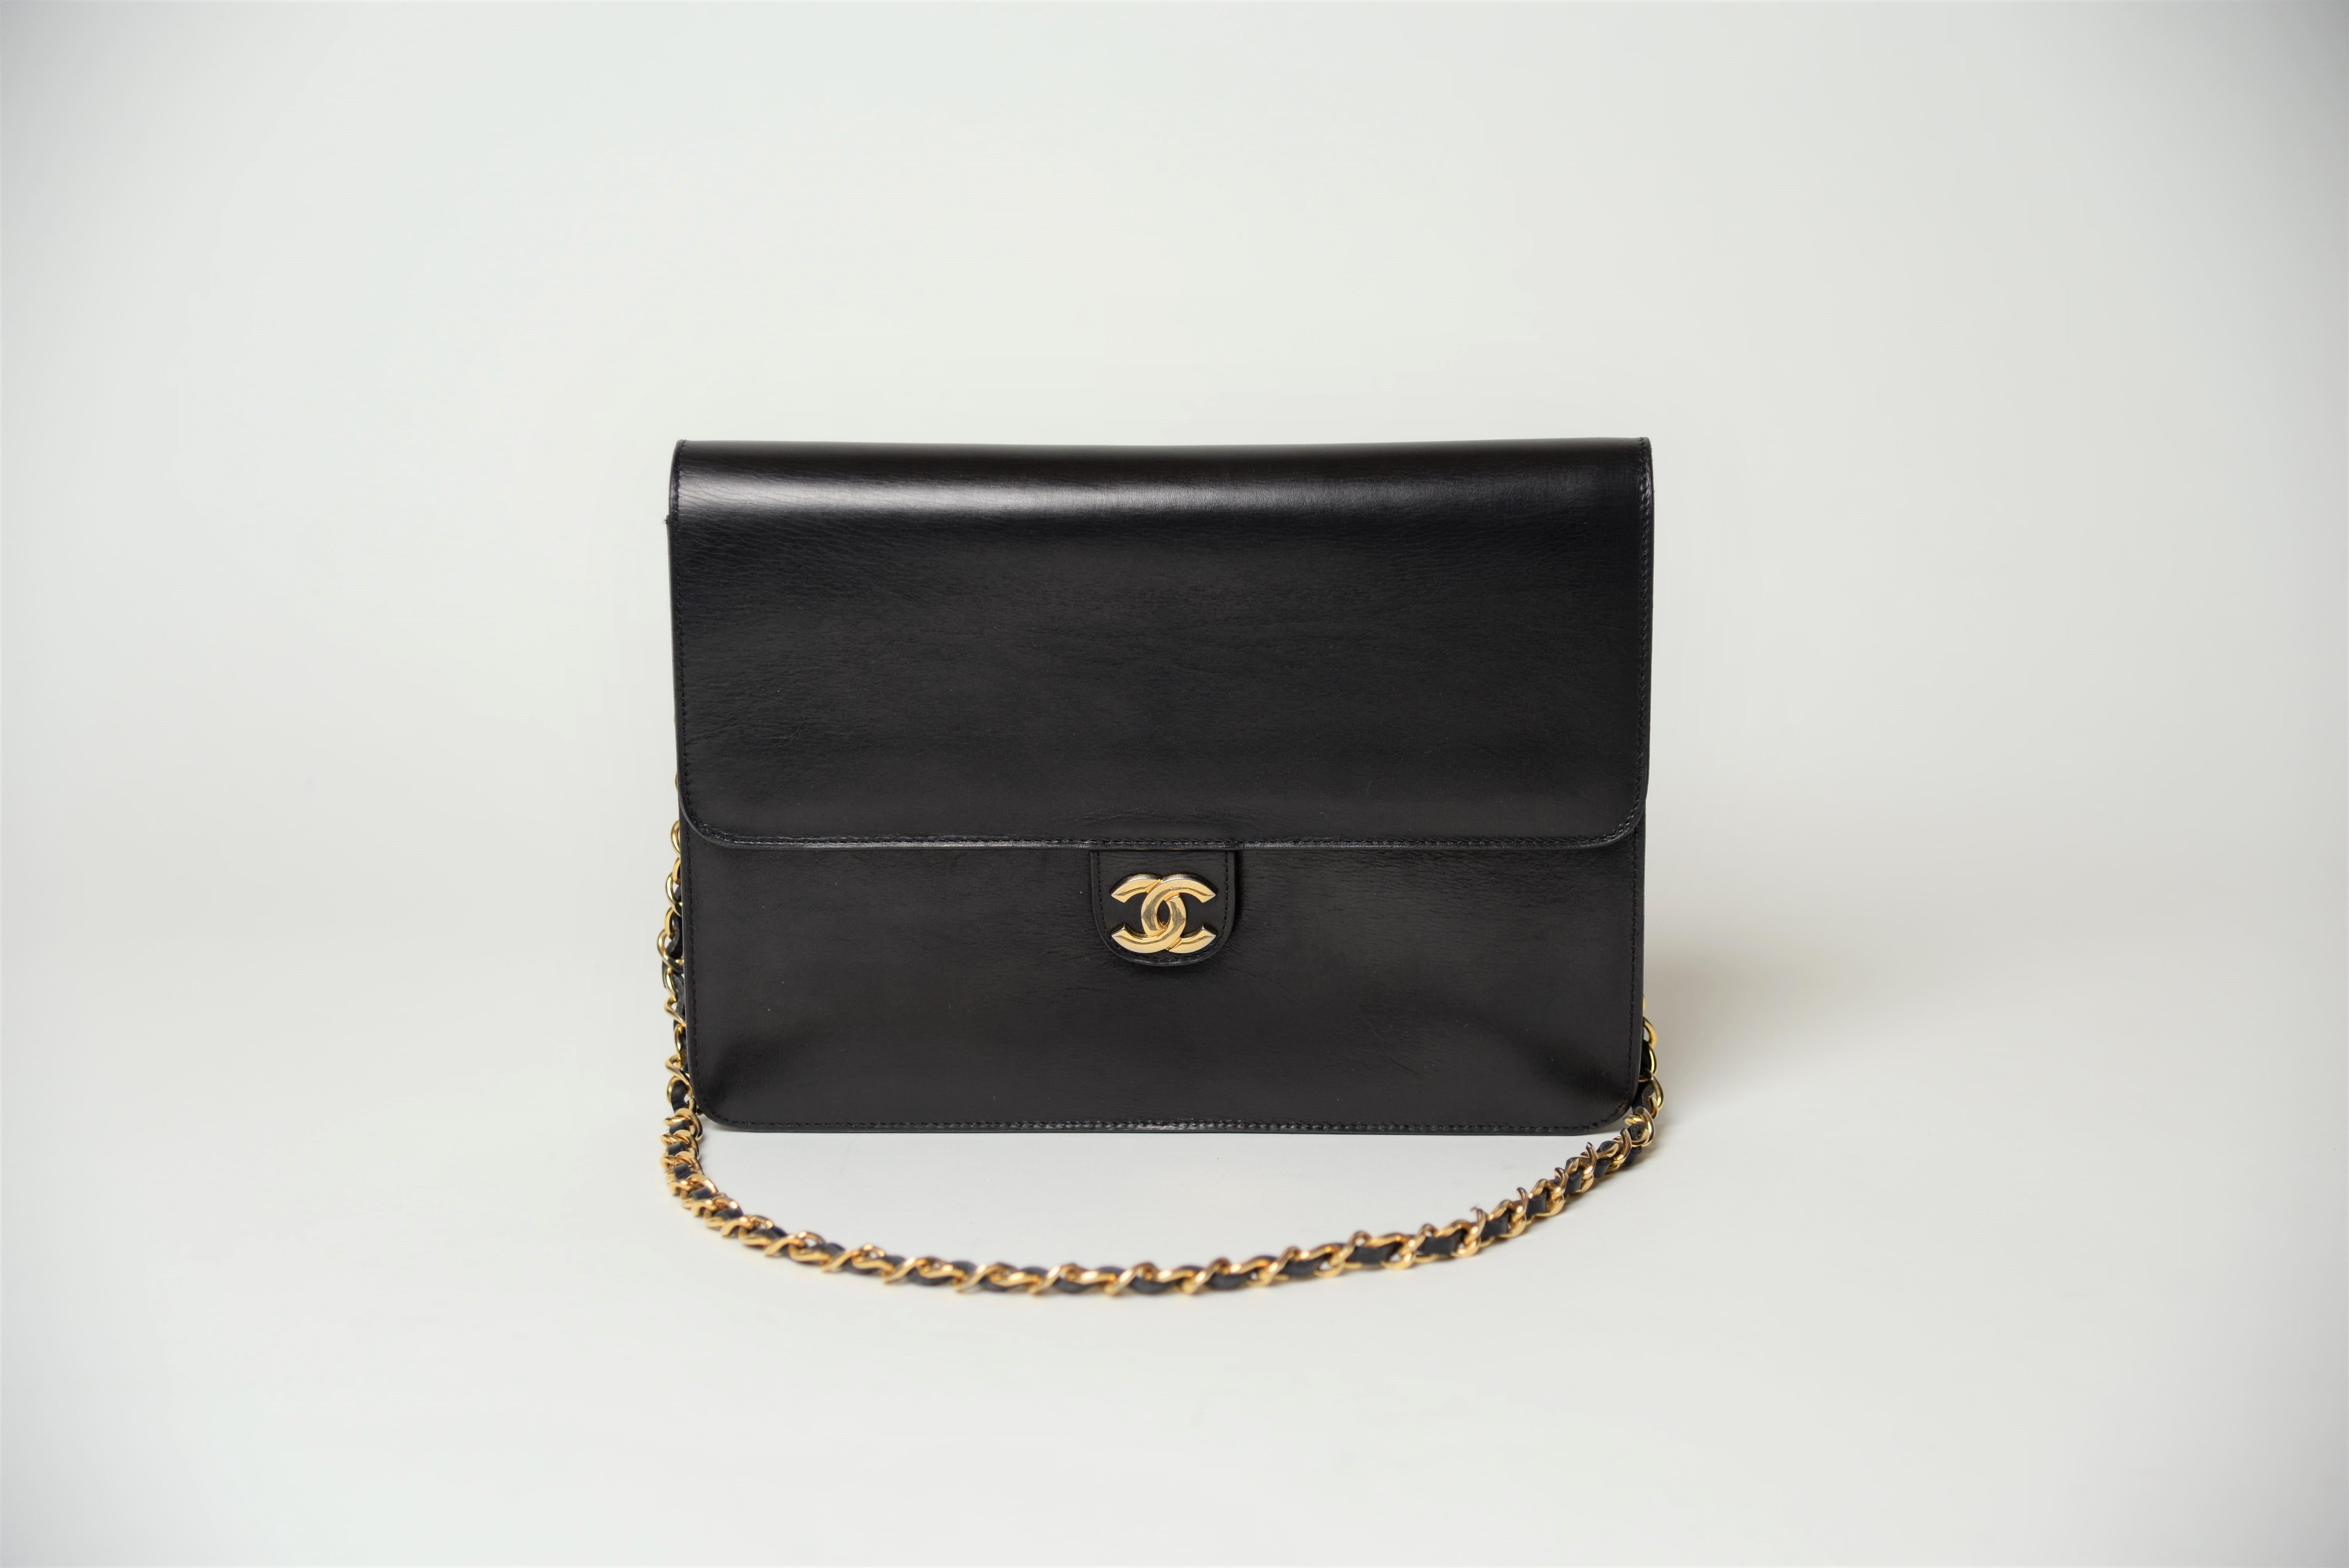 From the collection of Savineti we offer this Chanel Single Flap Bag:
-	Brand: Chanel
-	Model: Single Flap
-	Year: 1970-1980
-	Condition: Good 
-	Materials: Calfskin Leather
-	Extras: certificate of authenticity (by Real Authentication)

We at